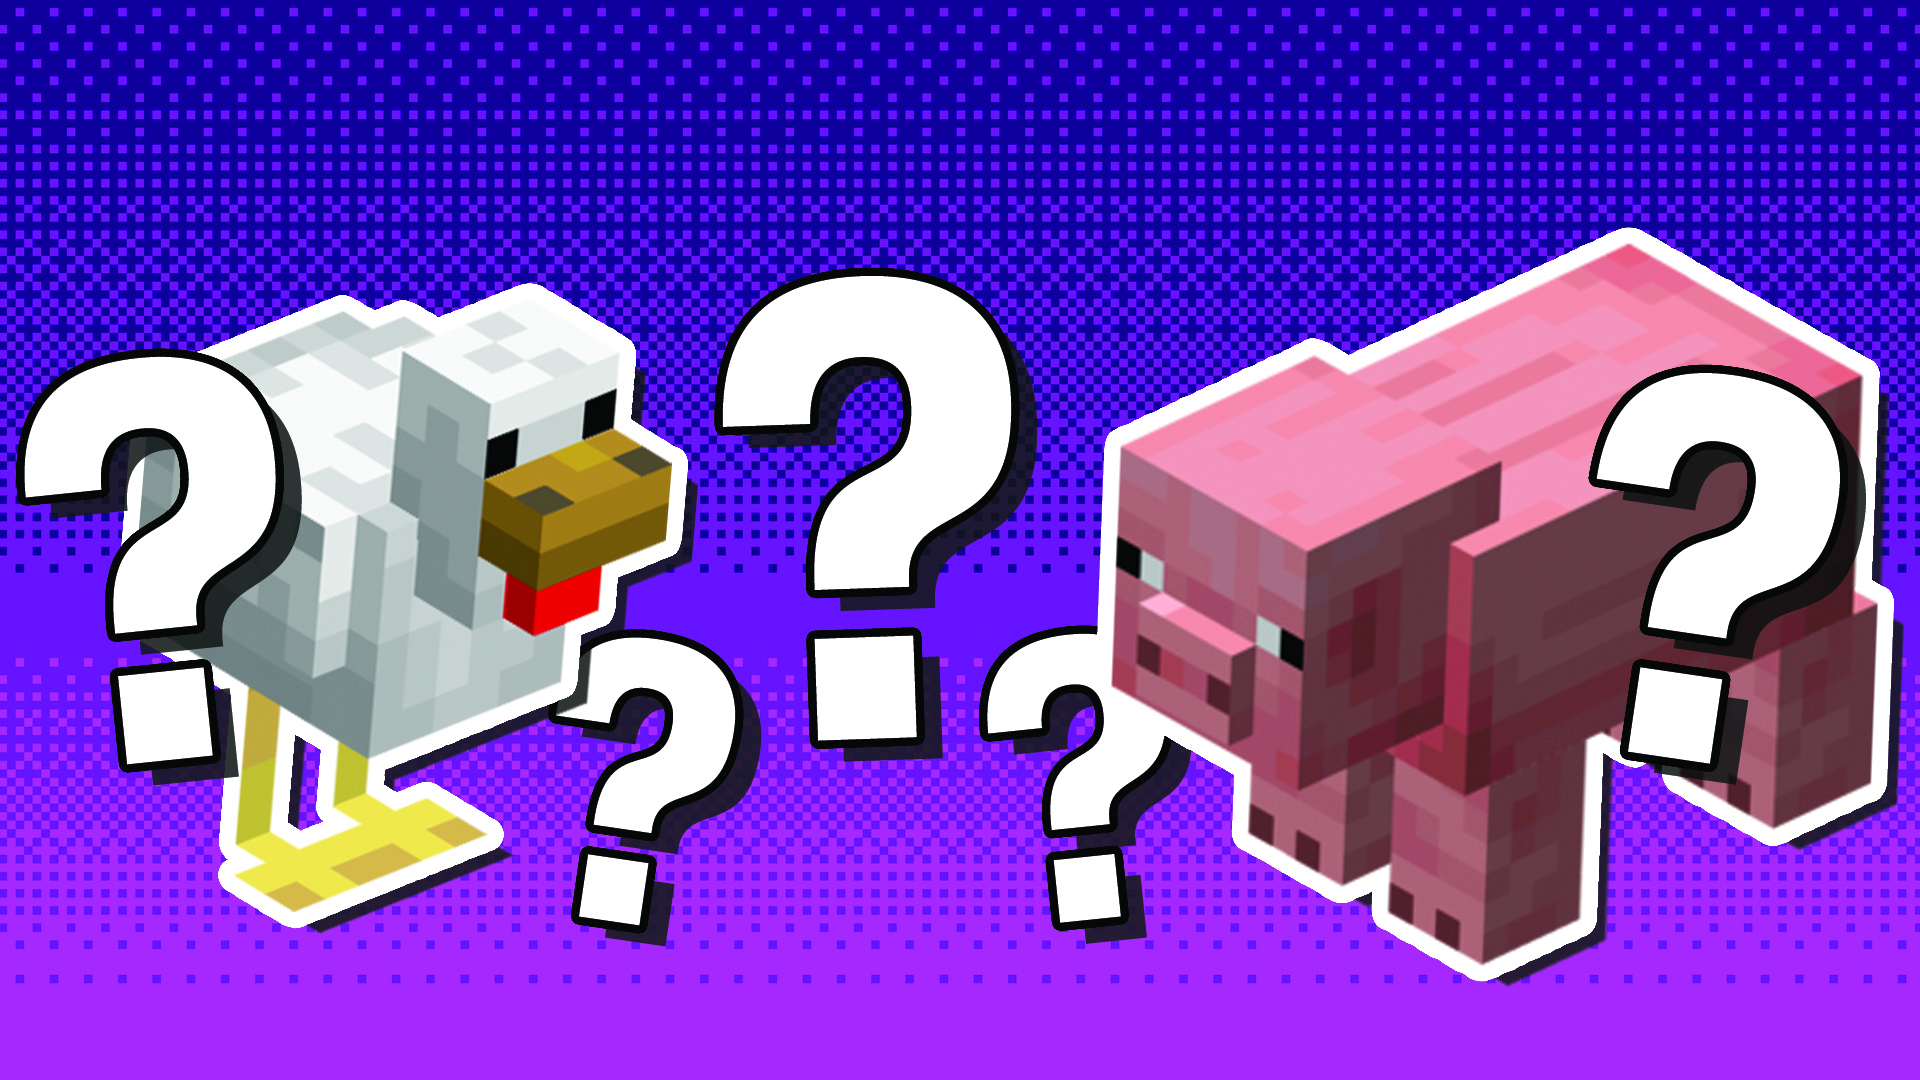 Which Minecraft animal are you?